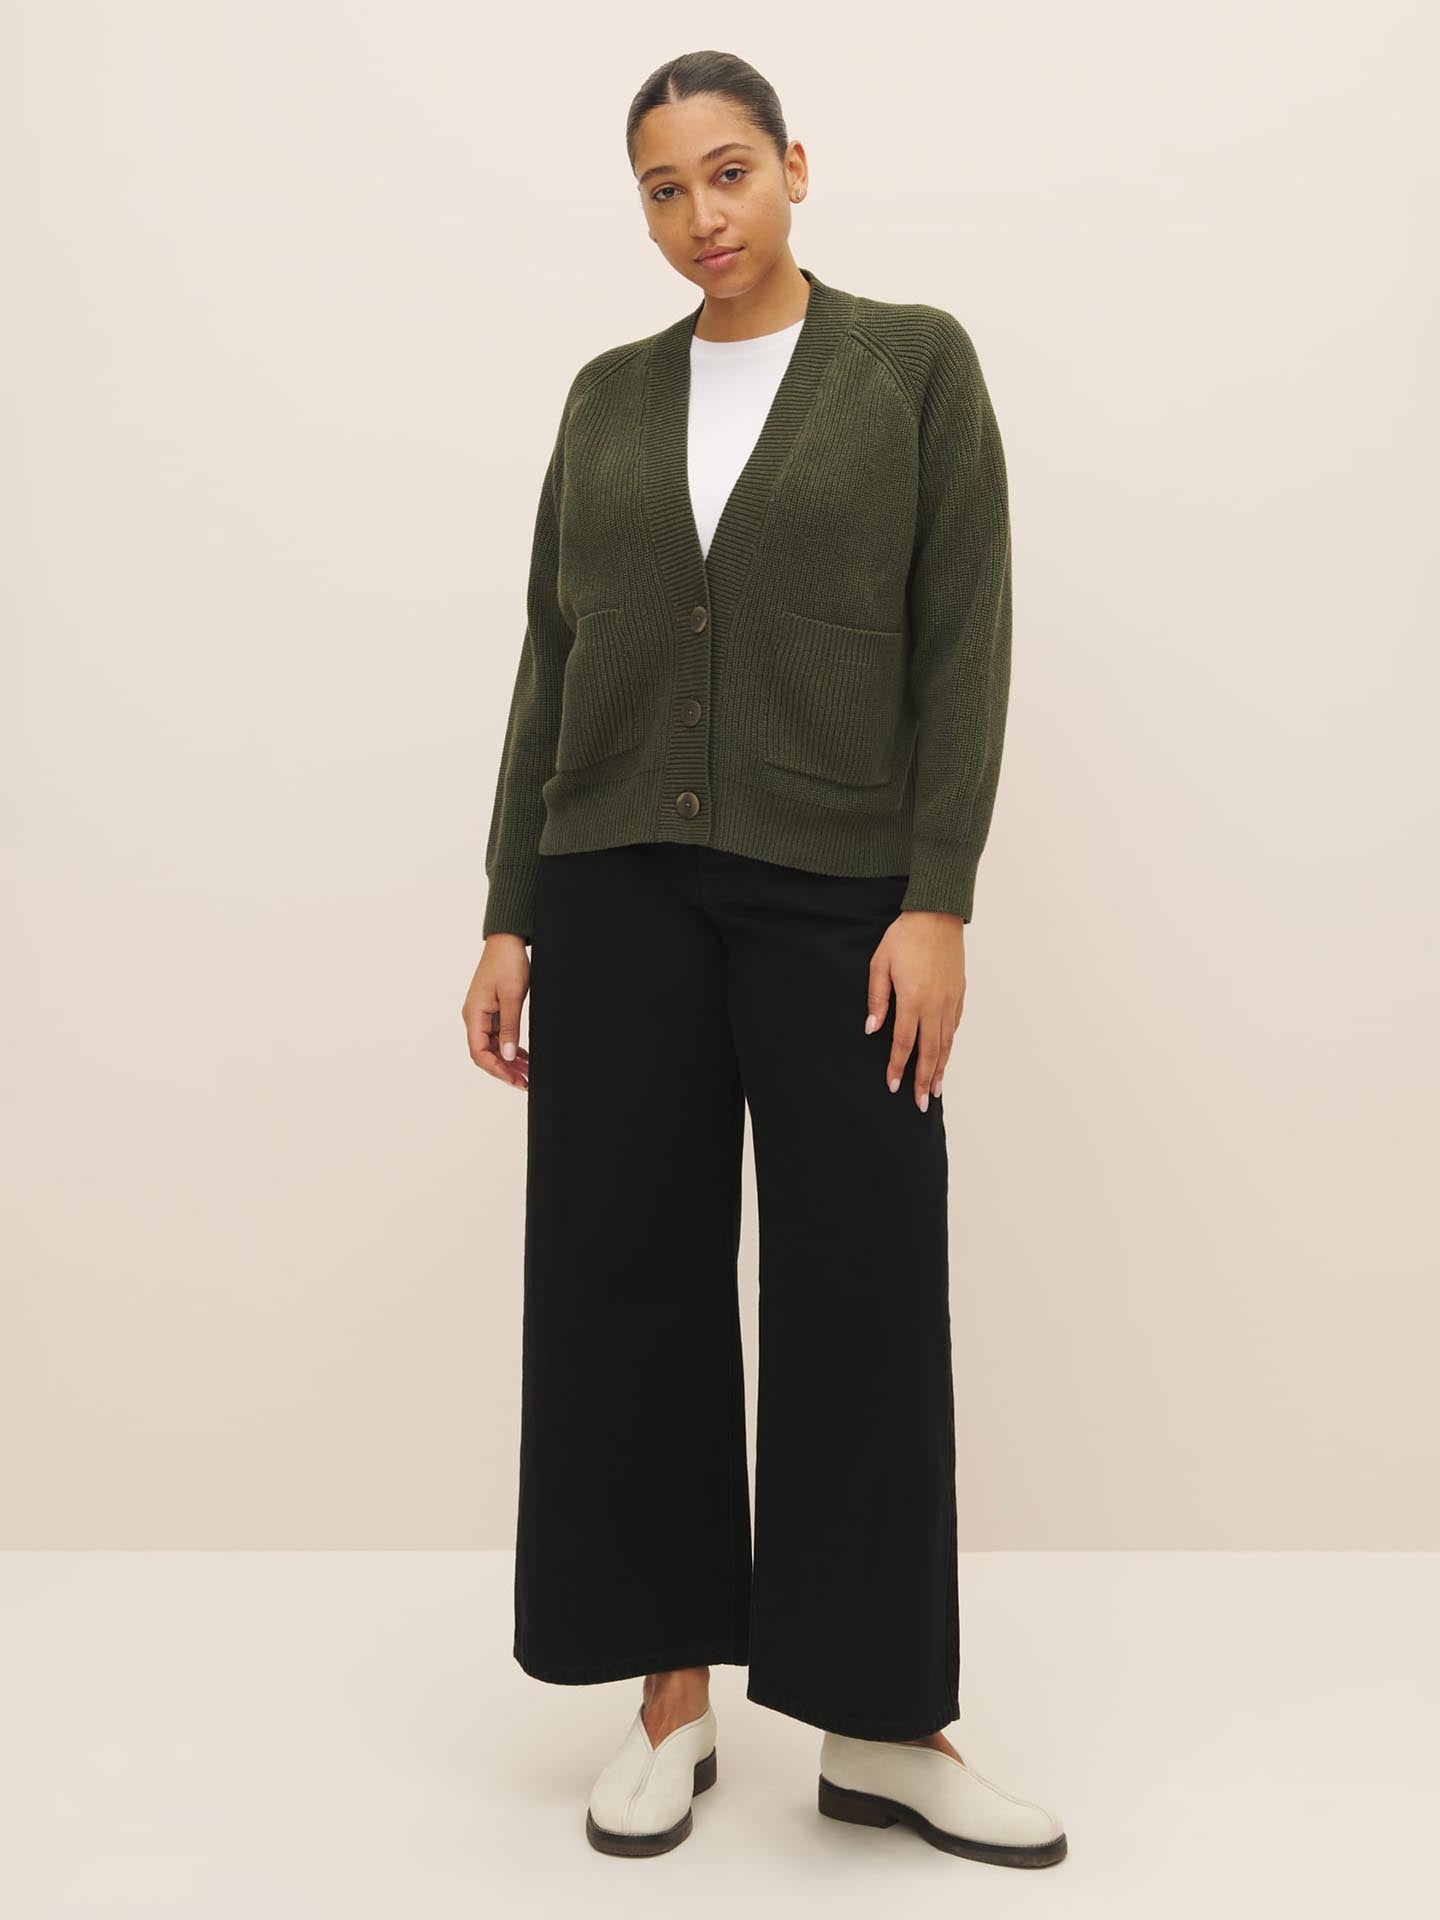 Woman posing in a Kowtow Hannes Cardigan – Khaki Marle, white top, black trousers, and white shoes against a neutral background.